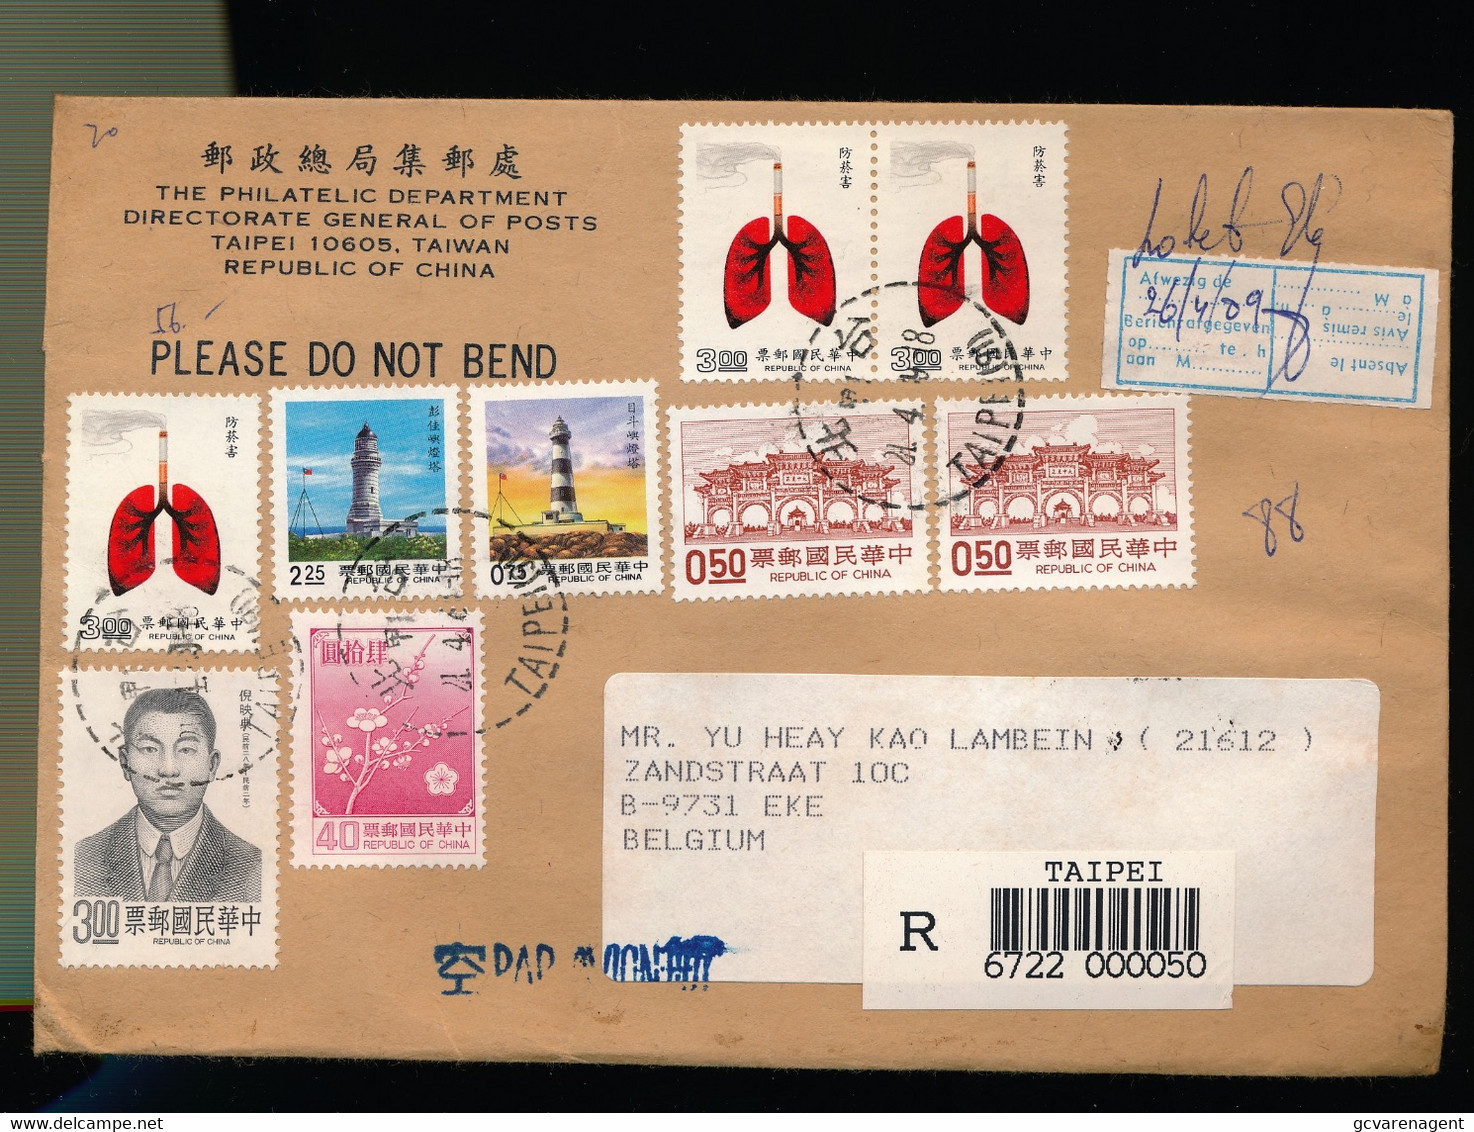 TAIWAN REPUBLIC OF CHINA   COVER 2009  RECOMMANDE  TAIPEI - Covers & Documents